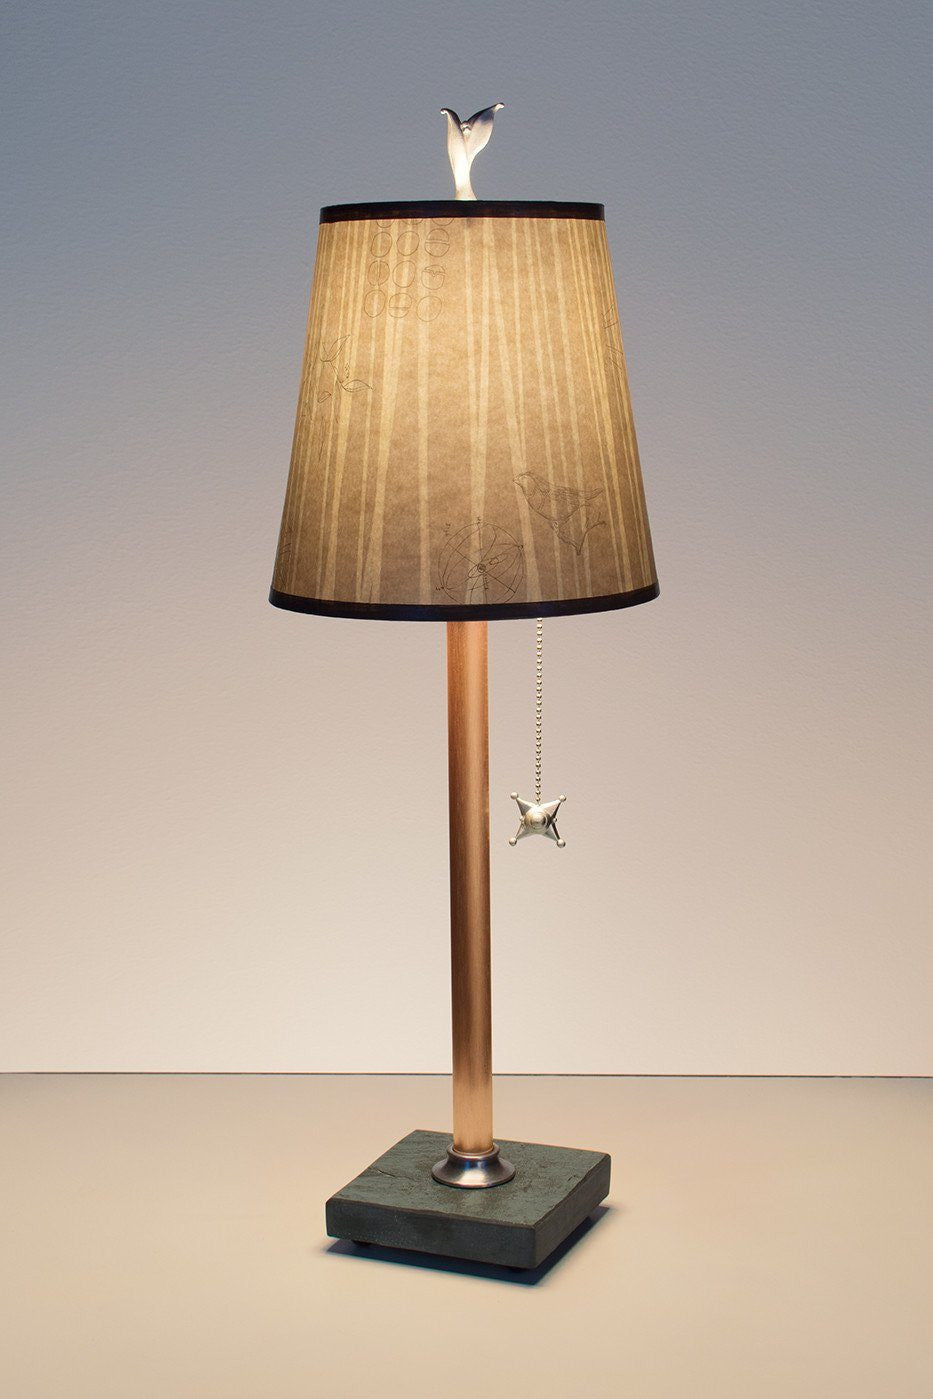 Janna Ugone & Co Table Lamps Copper Table Lamp with Small Drum Shade in Birch Lines